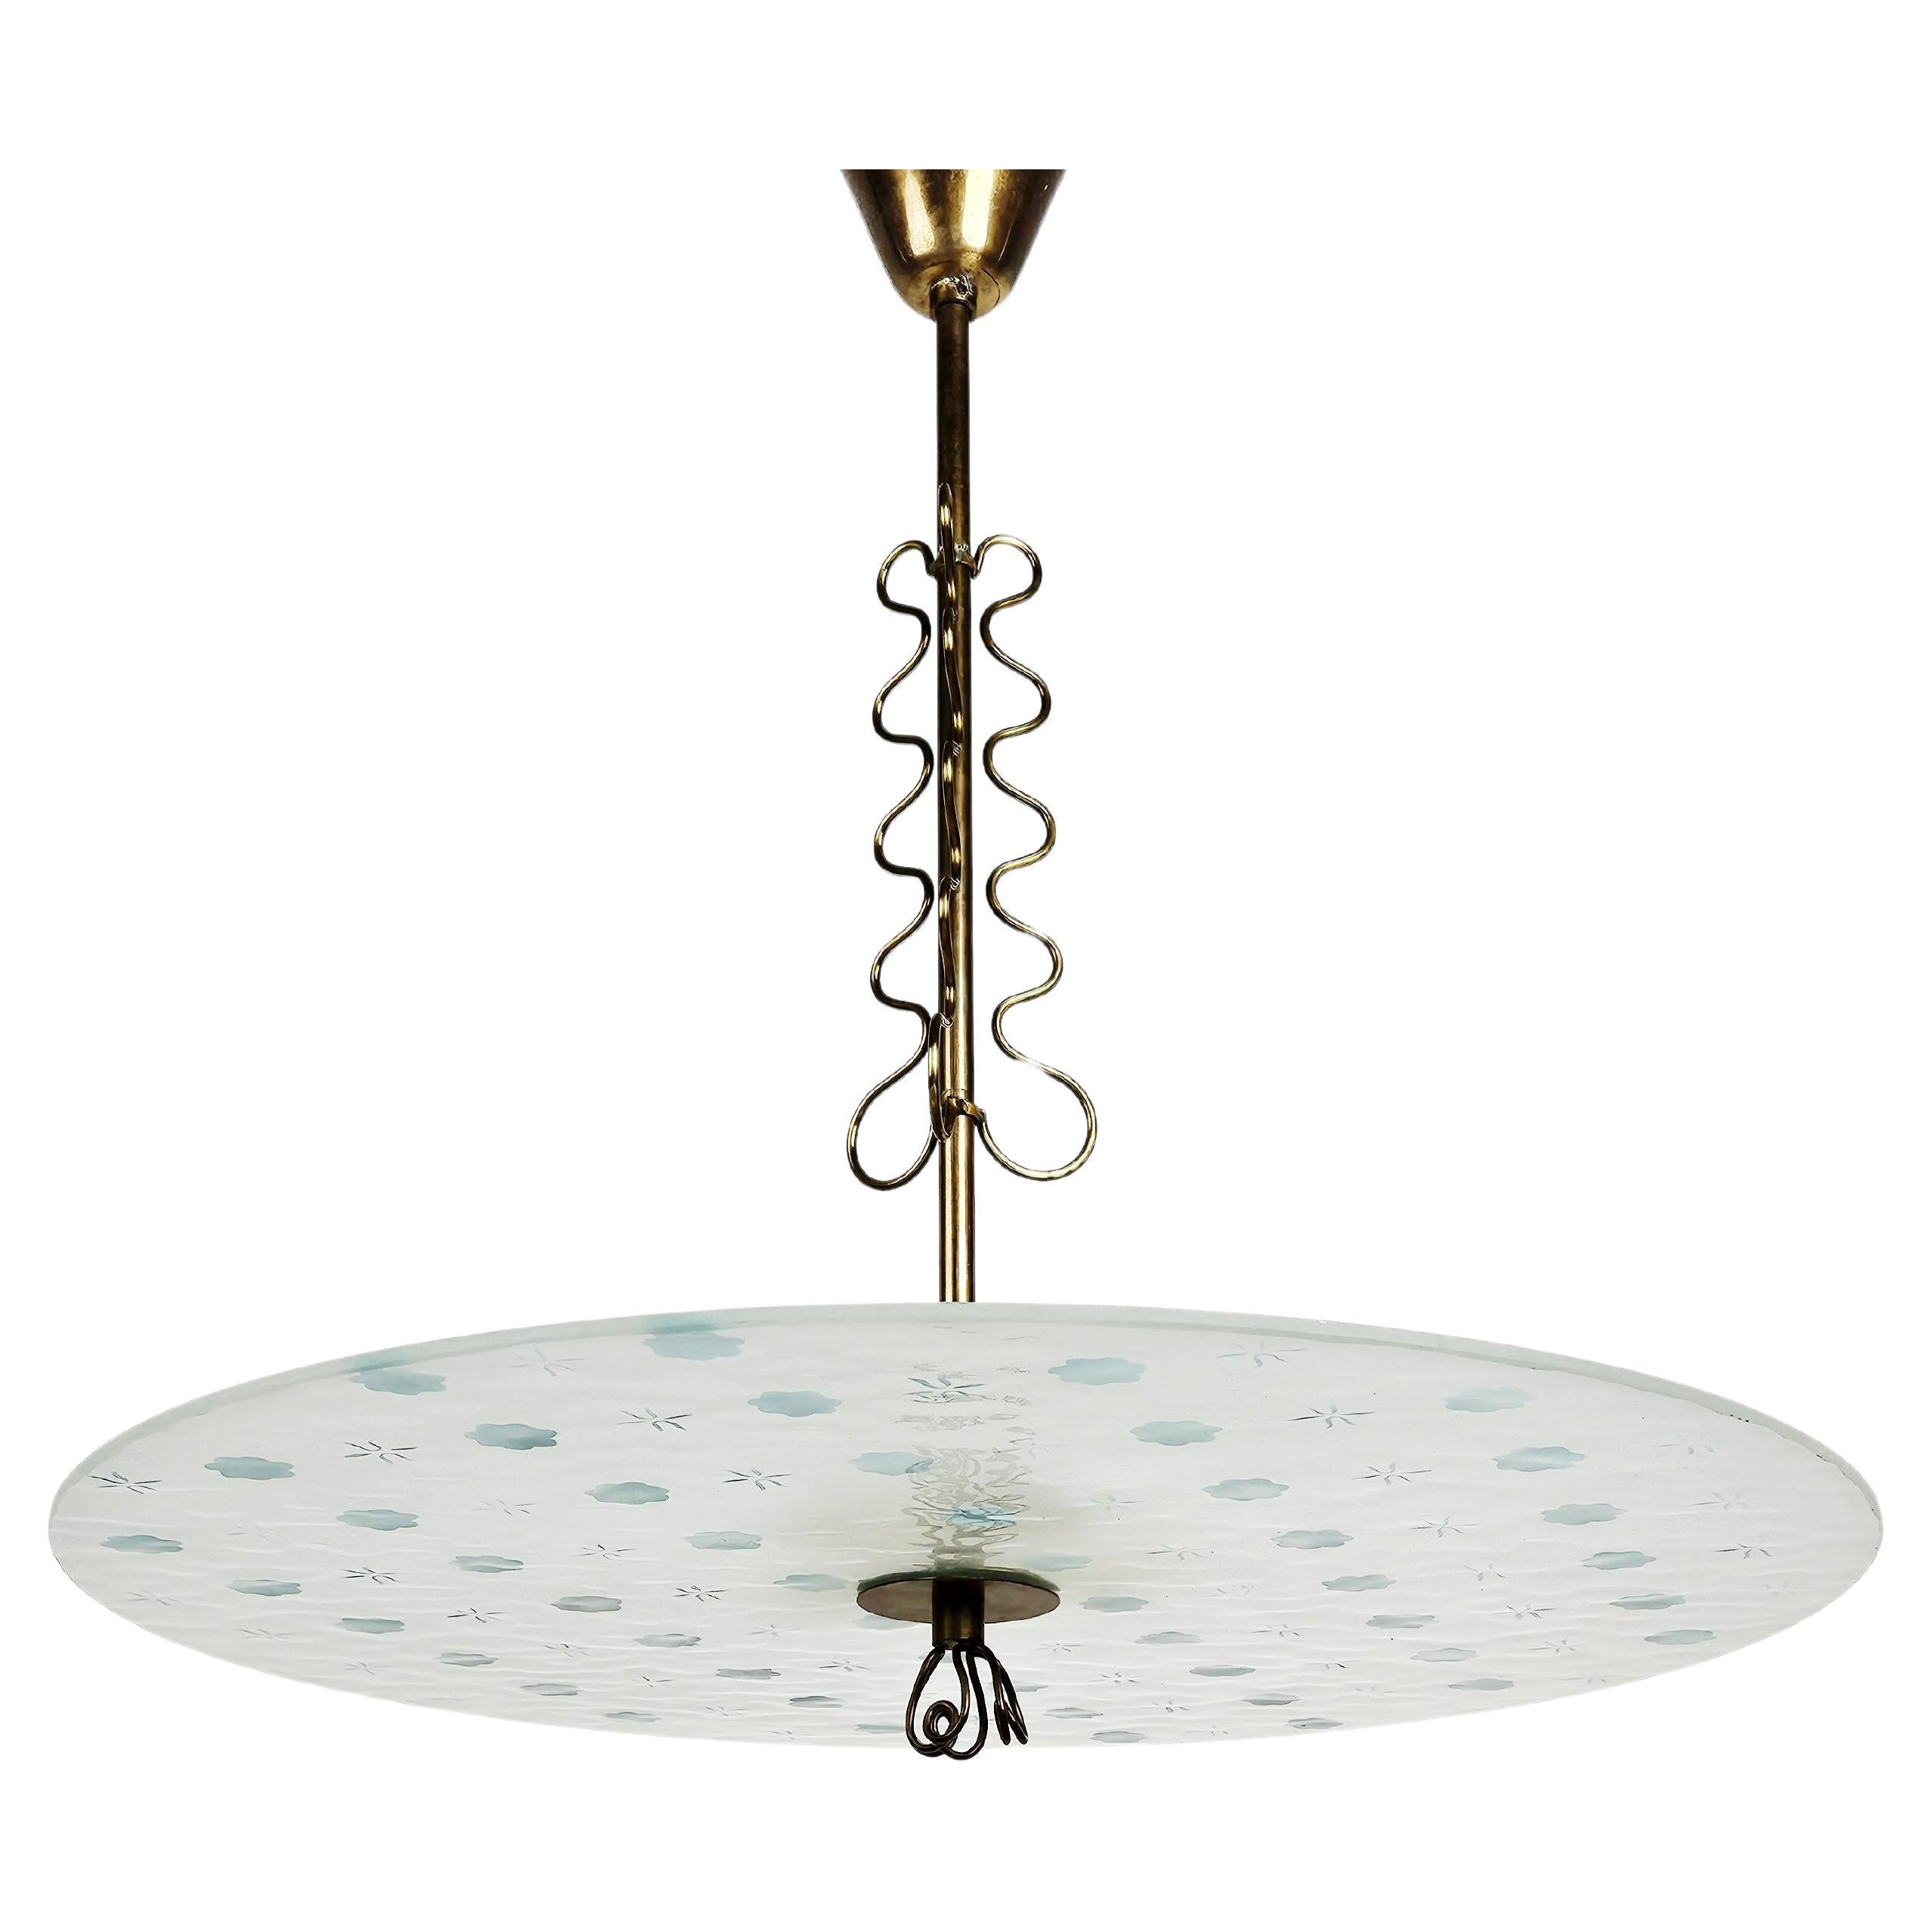 Rare Swedish Modern ceiling lamp, brass and glass, 1940s